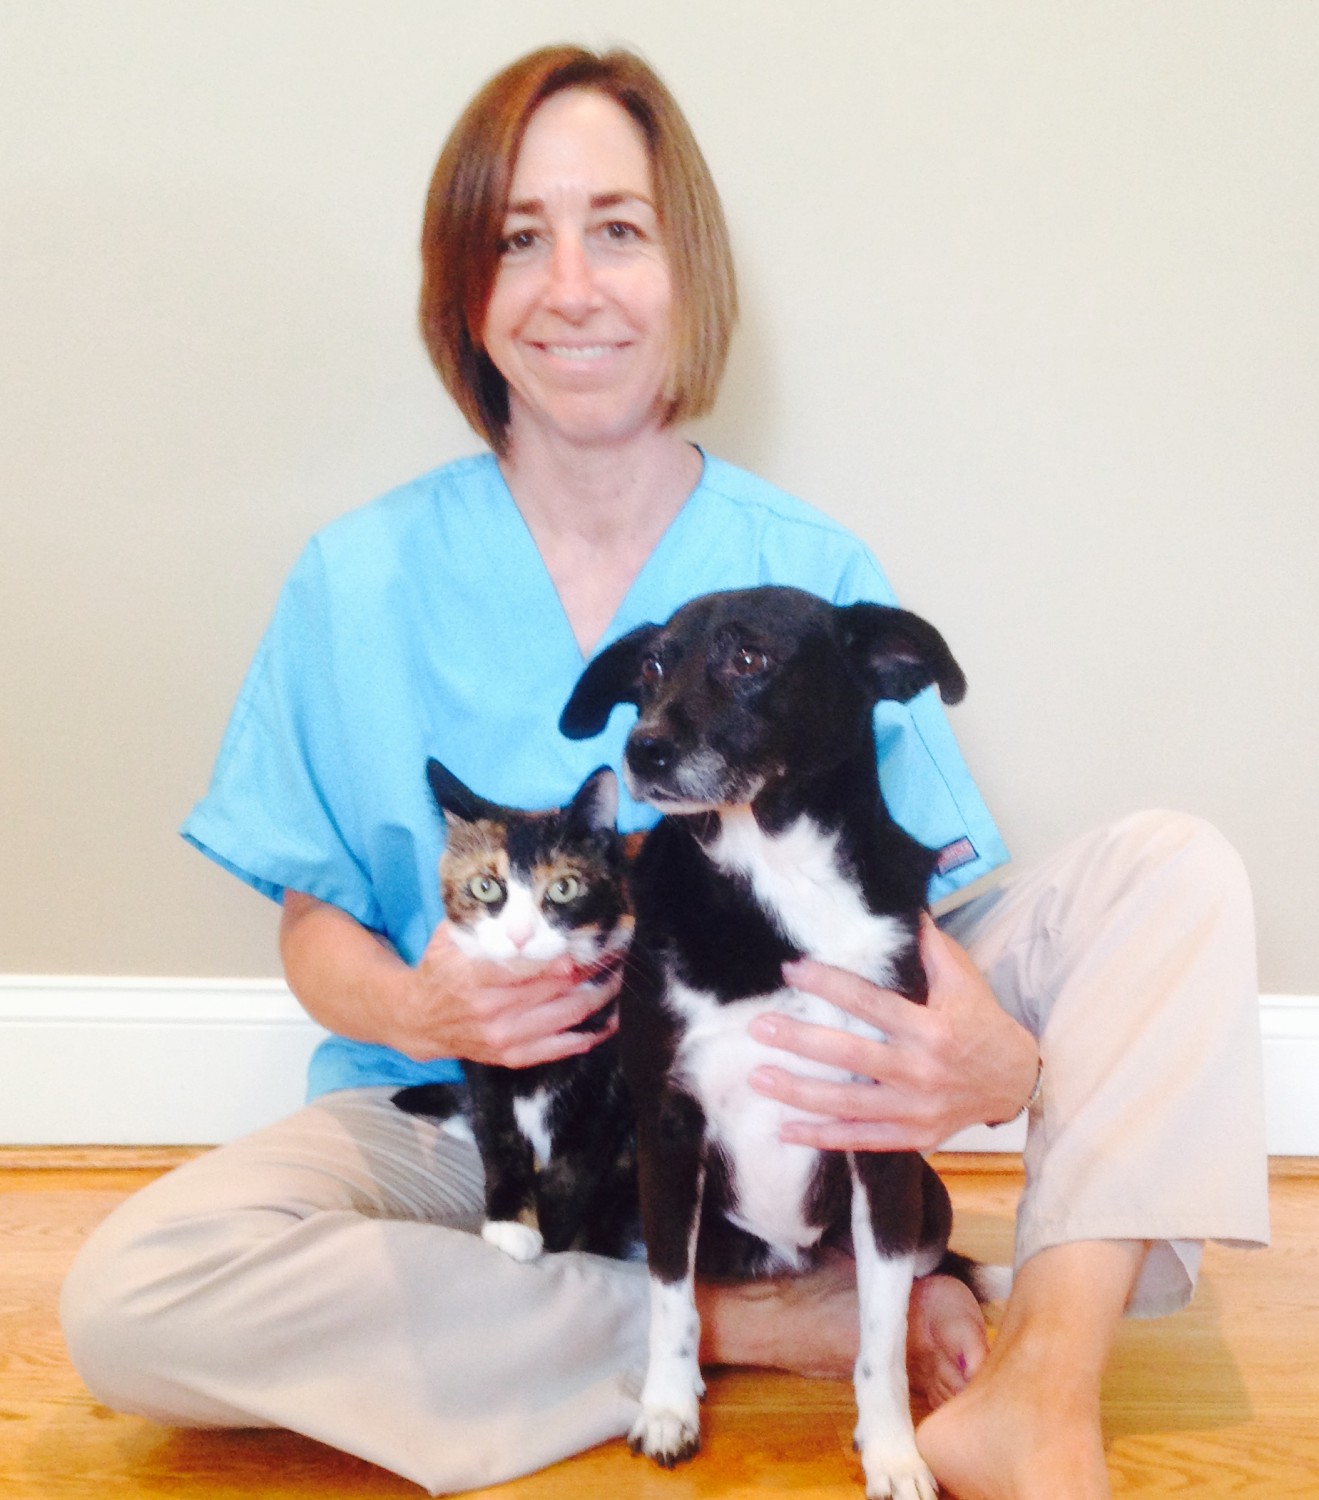 Dr. Peterson's veterinary assistant with her cat and dog